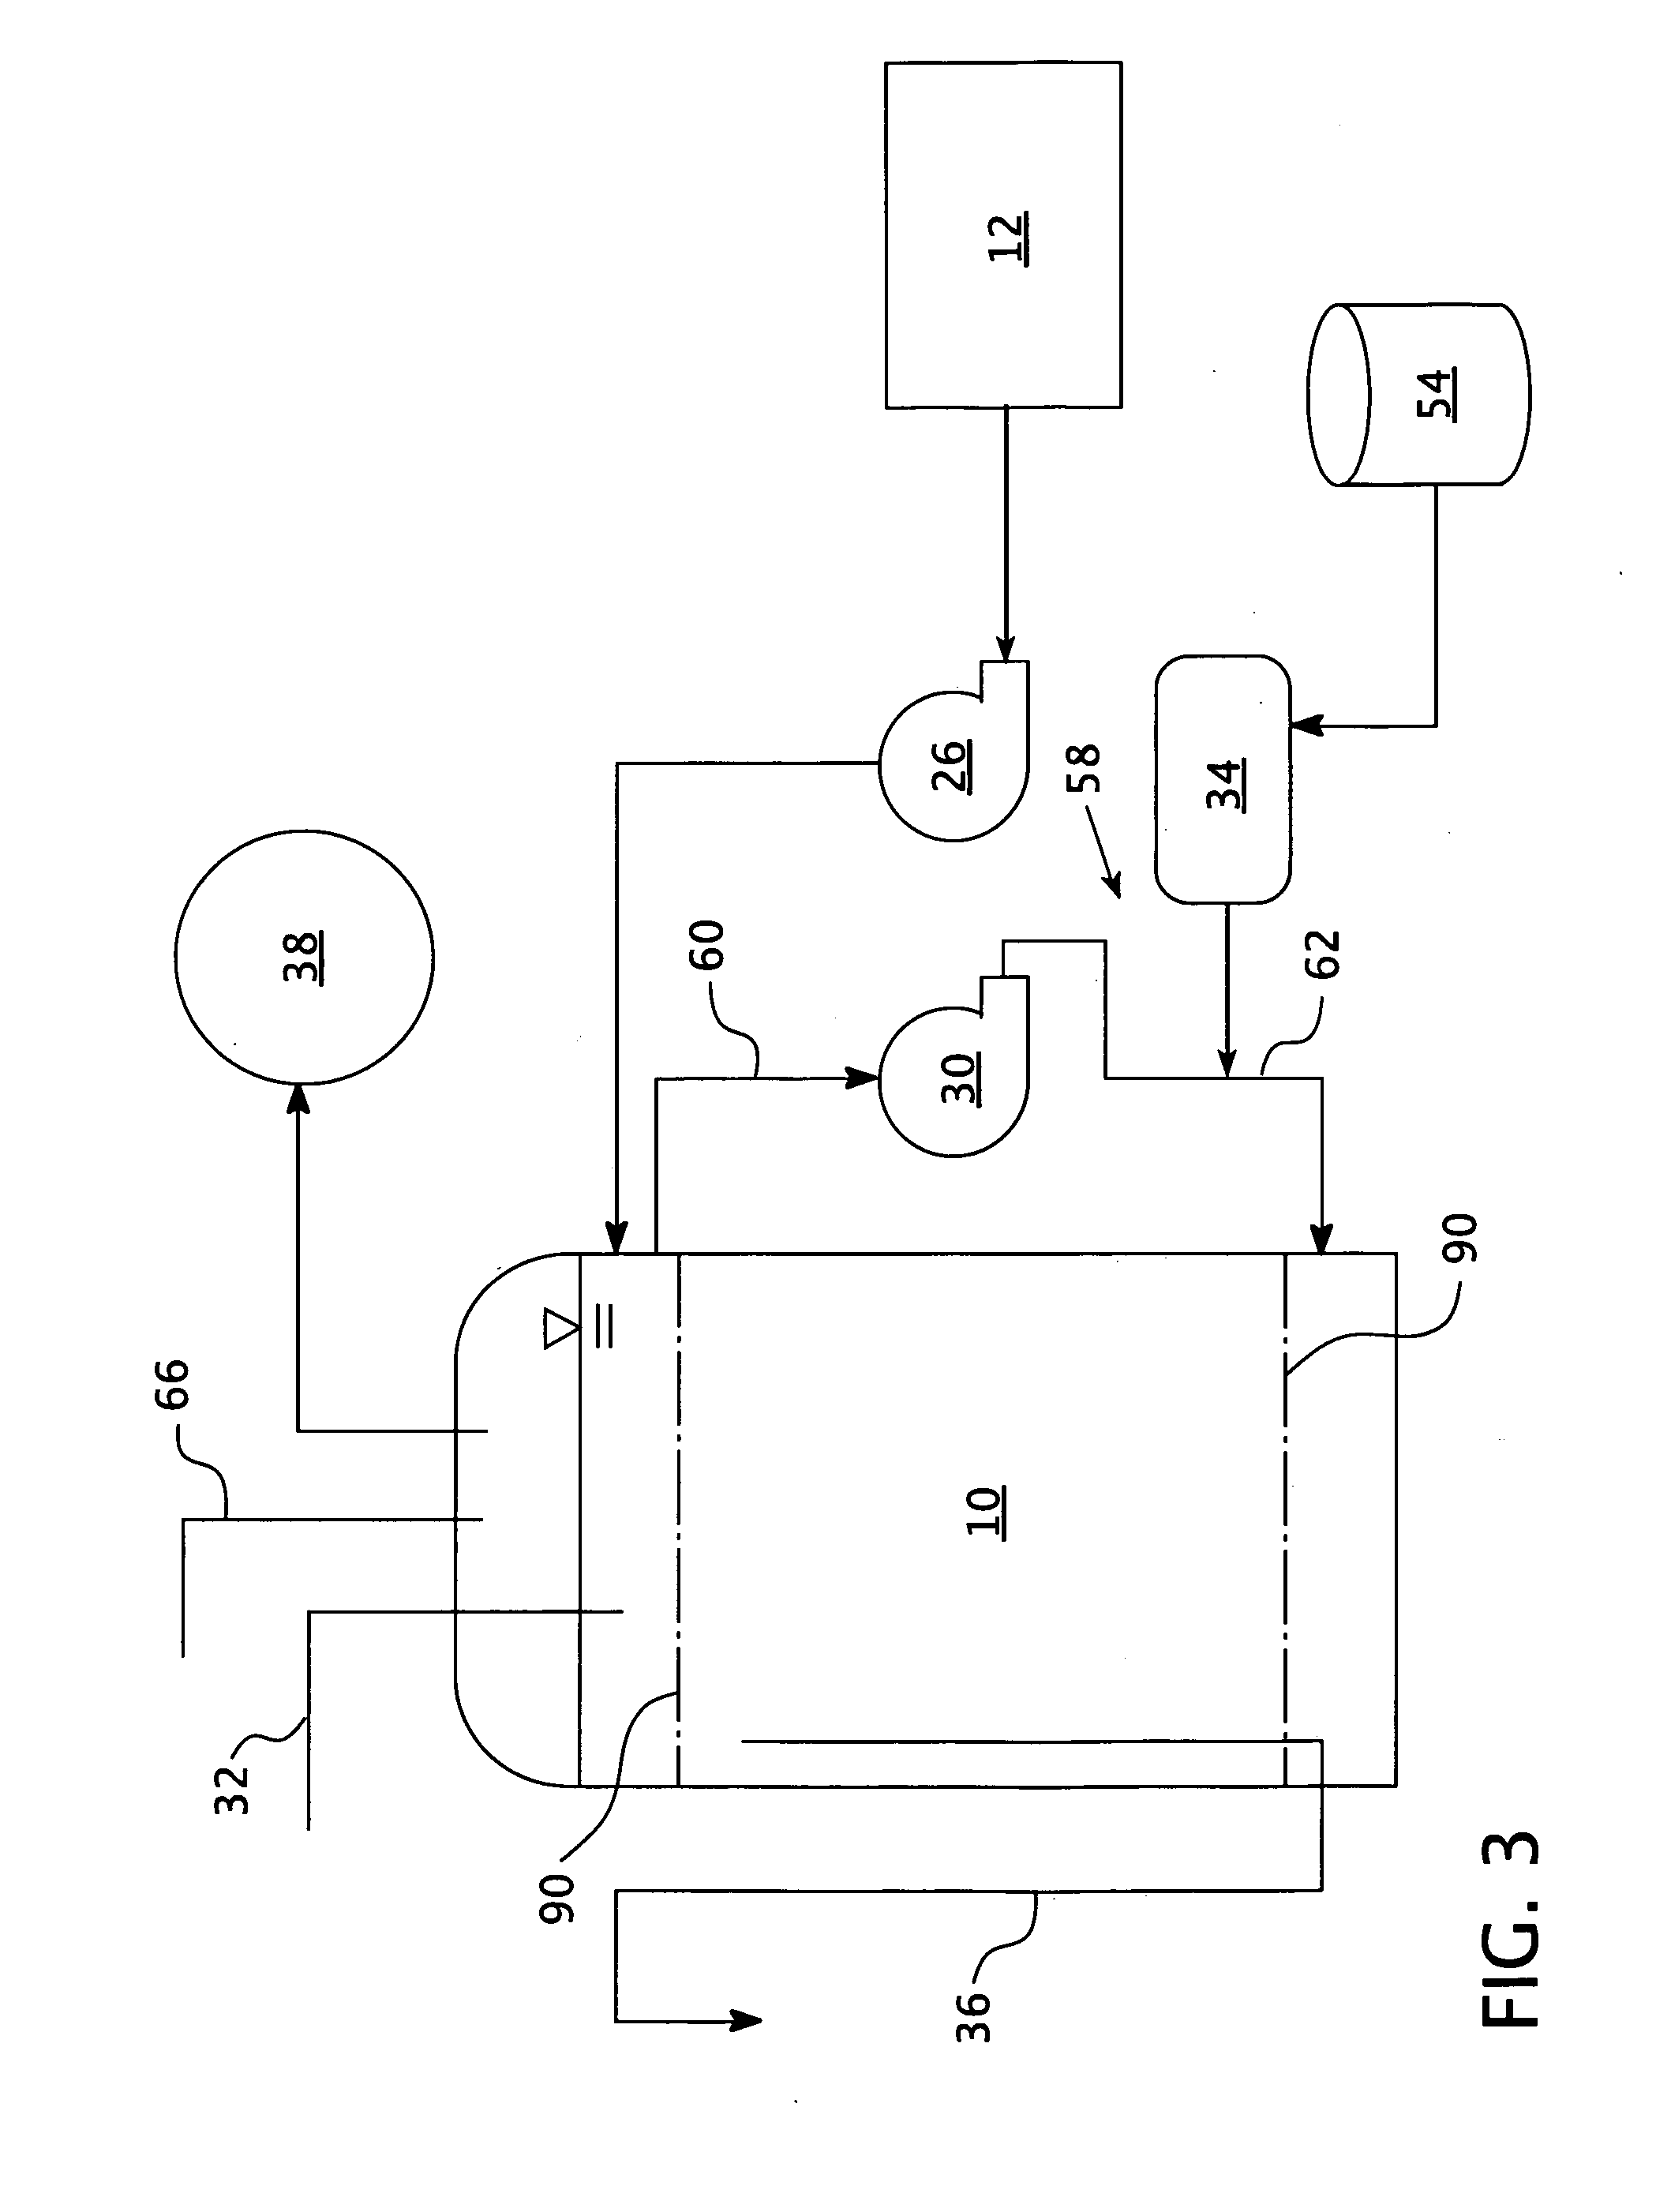 System for sustained microbial production of hydrogen gas in a bioreactor using klebsiella oxytoca